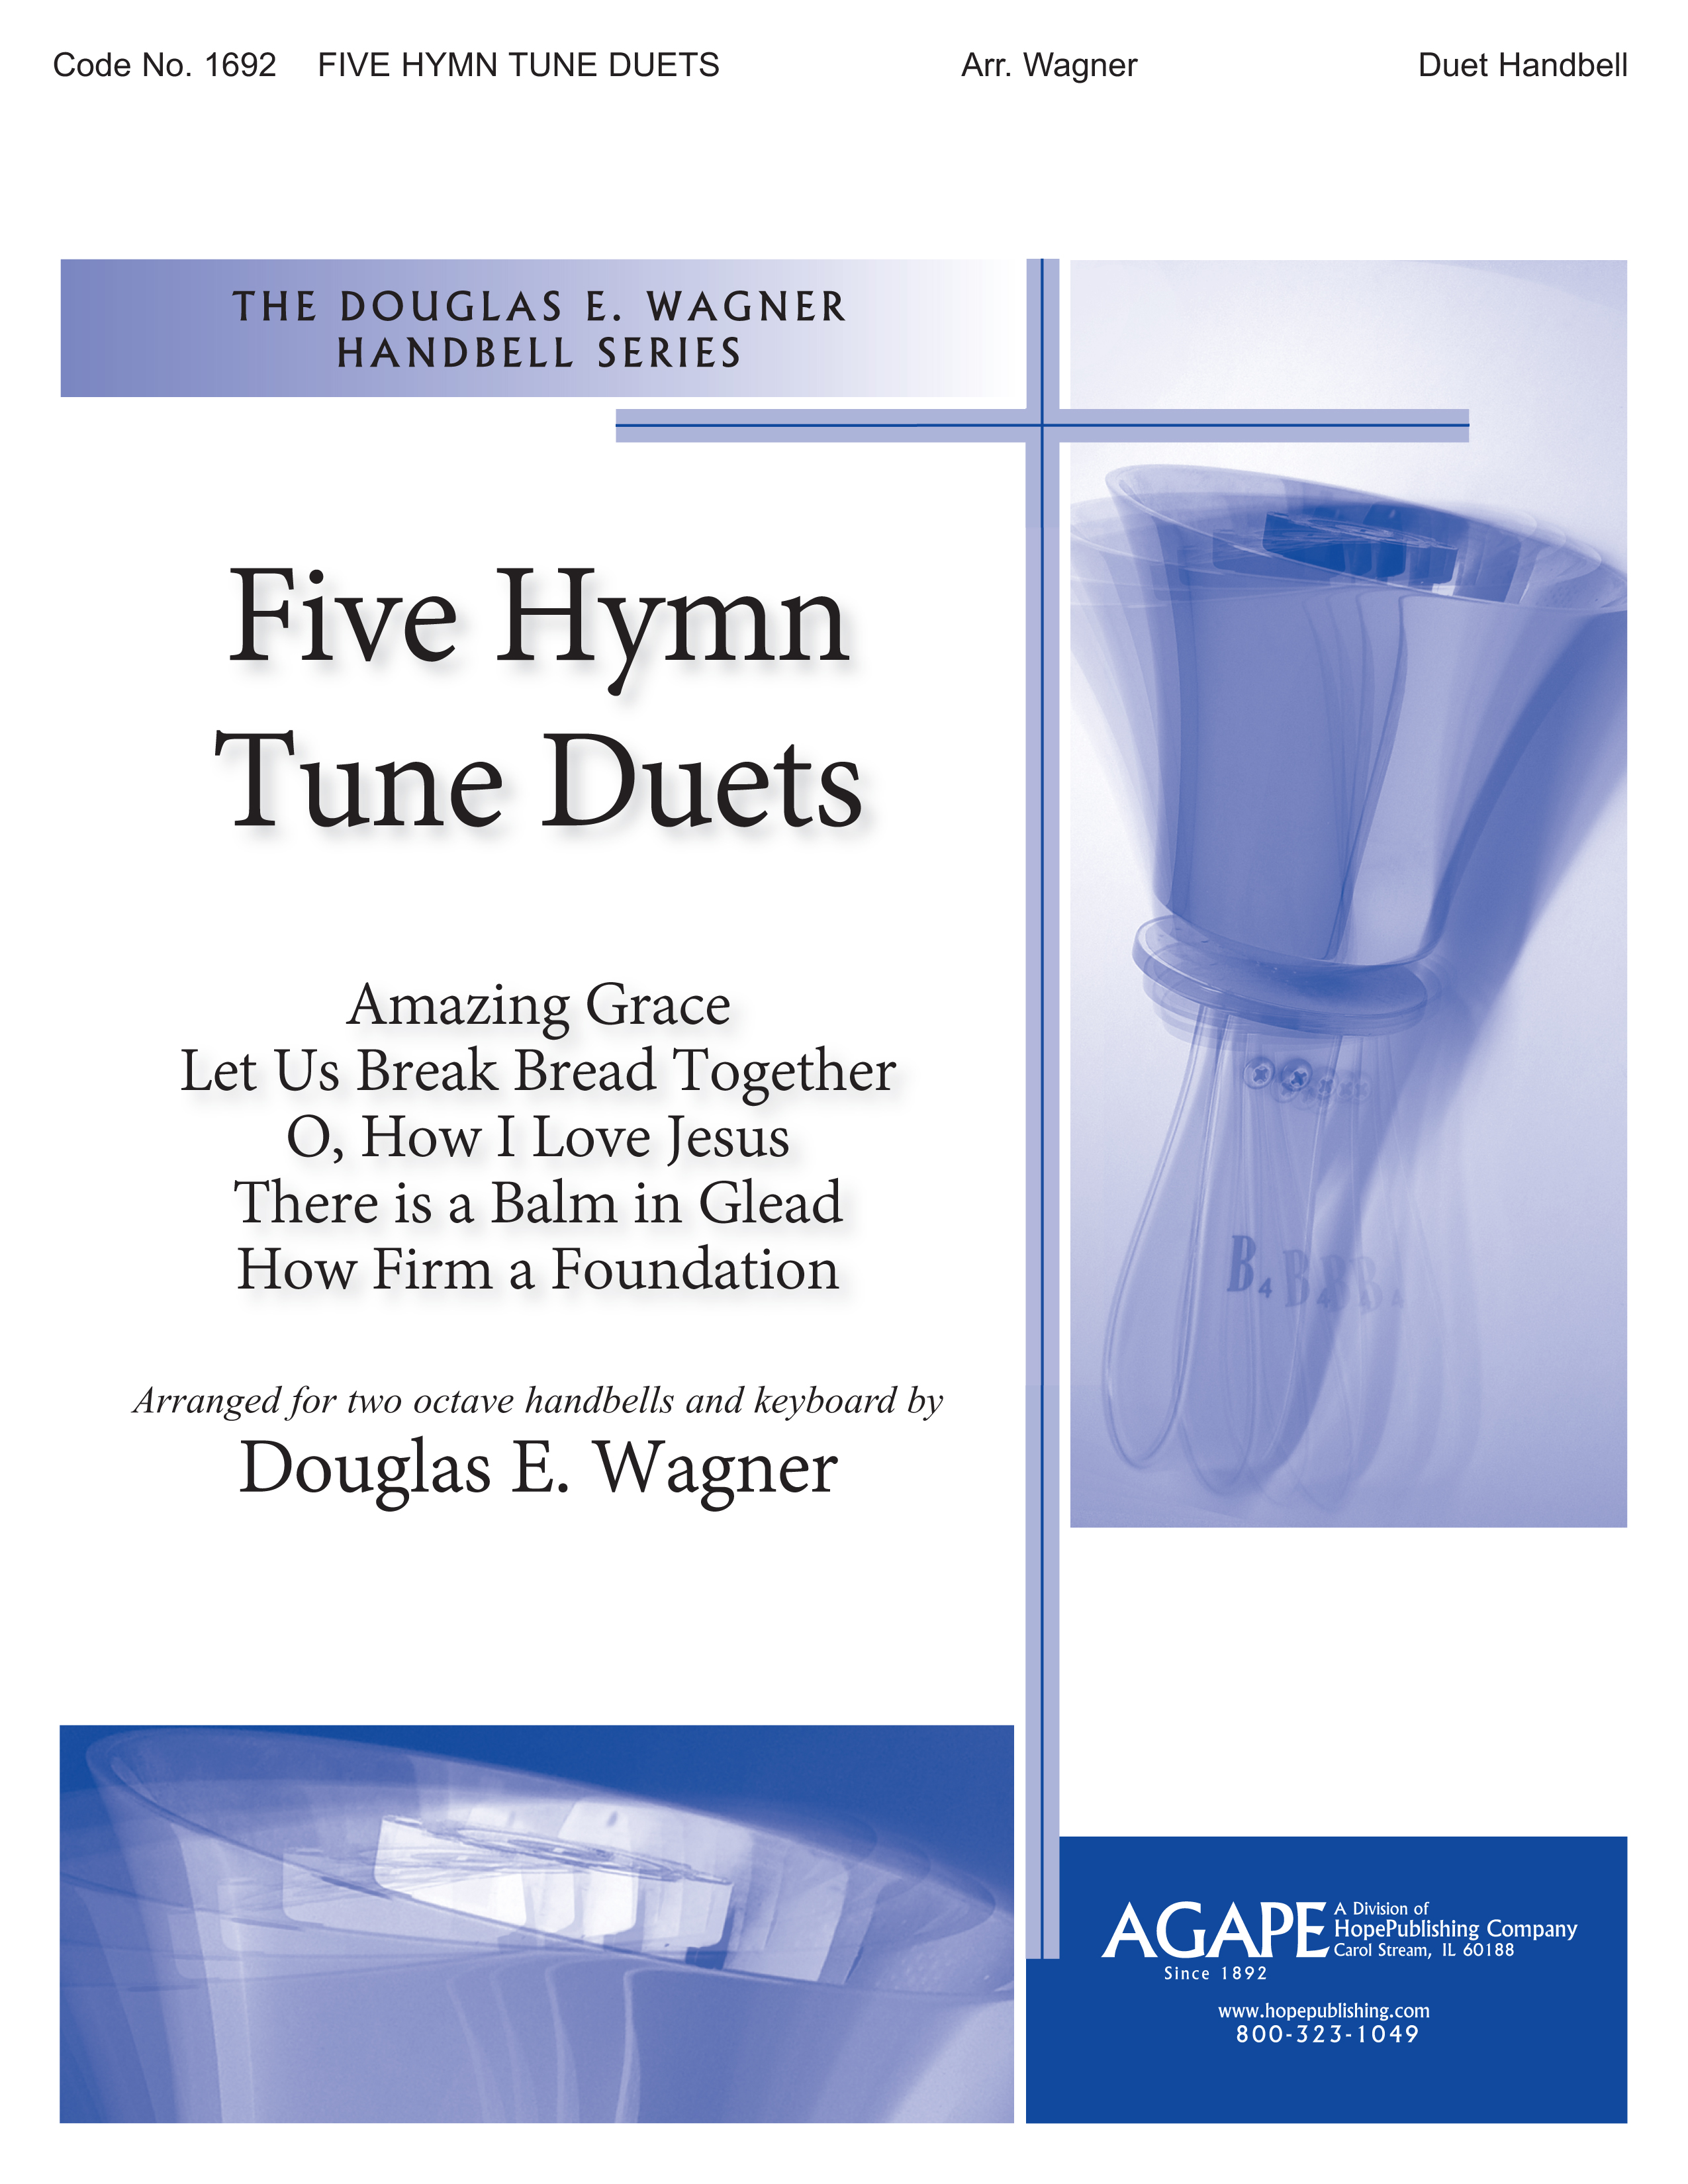 Five Hymn Tune Duets - Handbell Cover Image